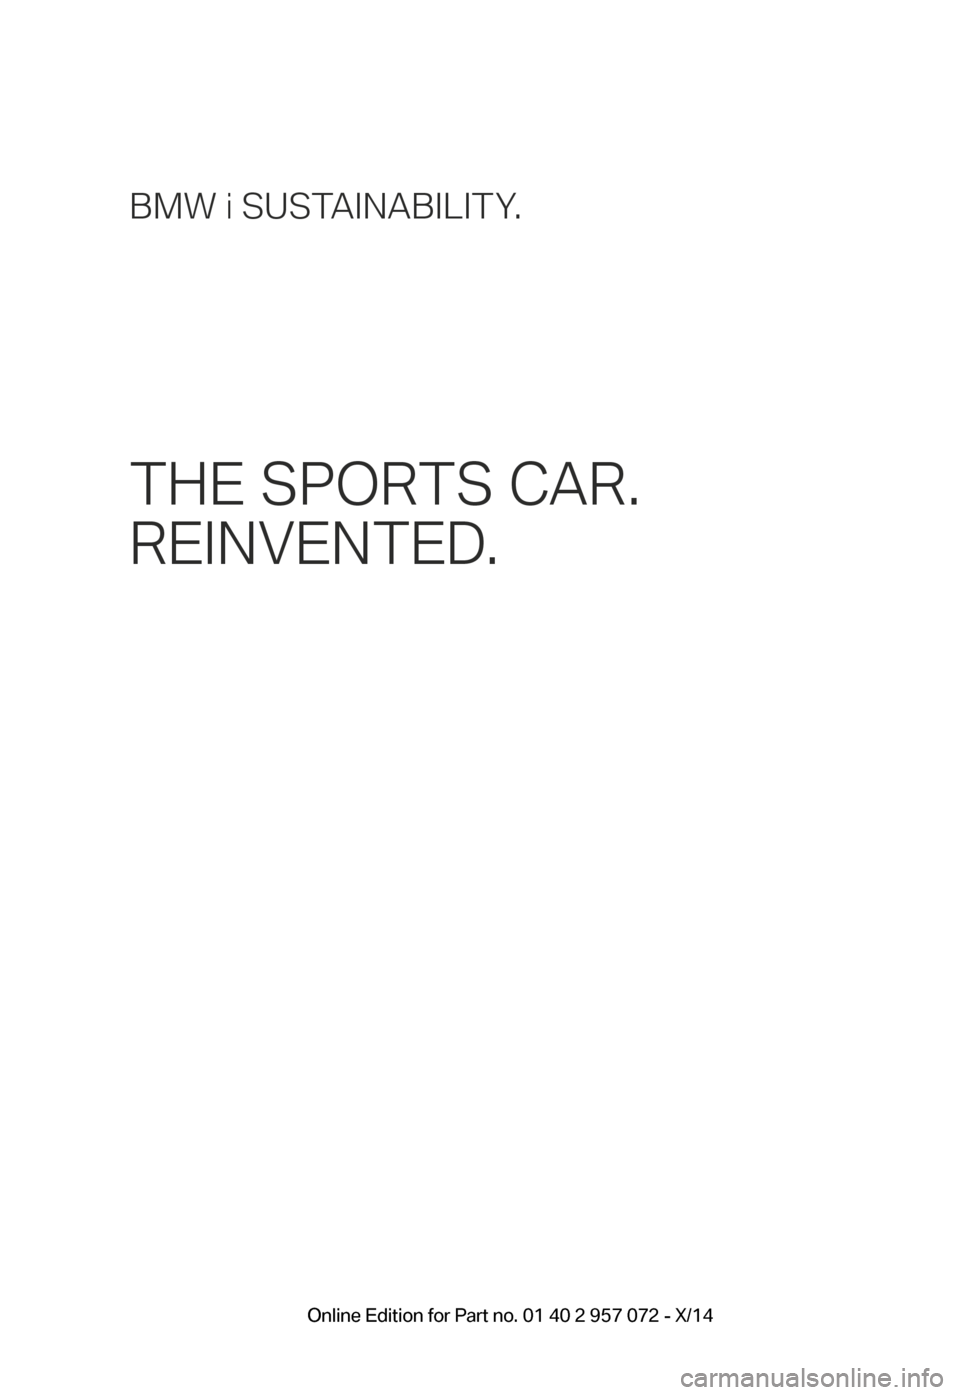 BMW I8 2014 I12 Owners Manual BMW i SUSTAINABILITY.
THE SPORTS CAR. 
REINVENTED.
BMW_i8_Bedienungseinleger_210x138mm_US.indd   115.01.14   17:53 Online Edition for Part no. 01 40 2 957 072 - X/14 